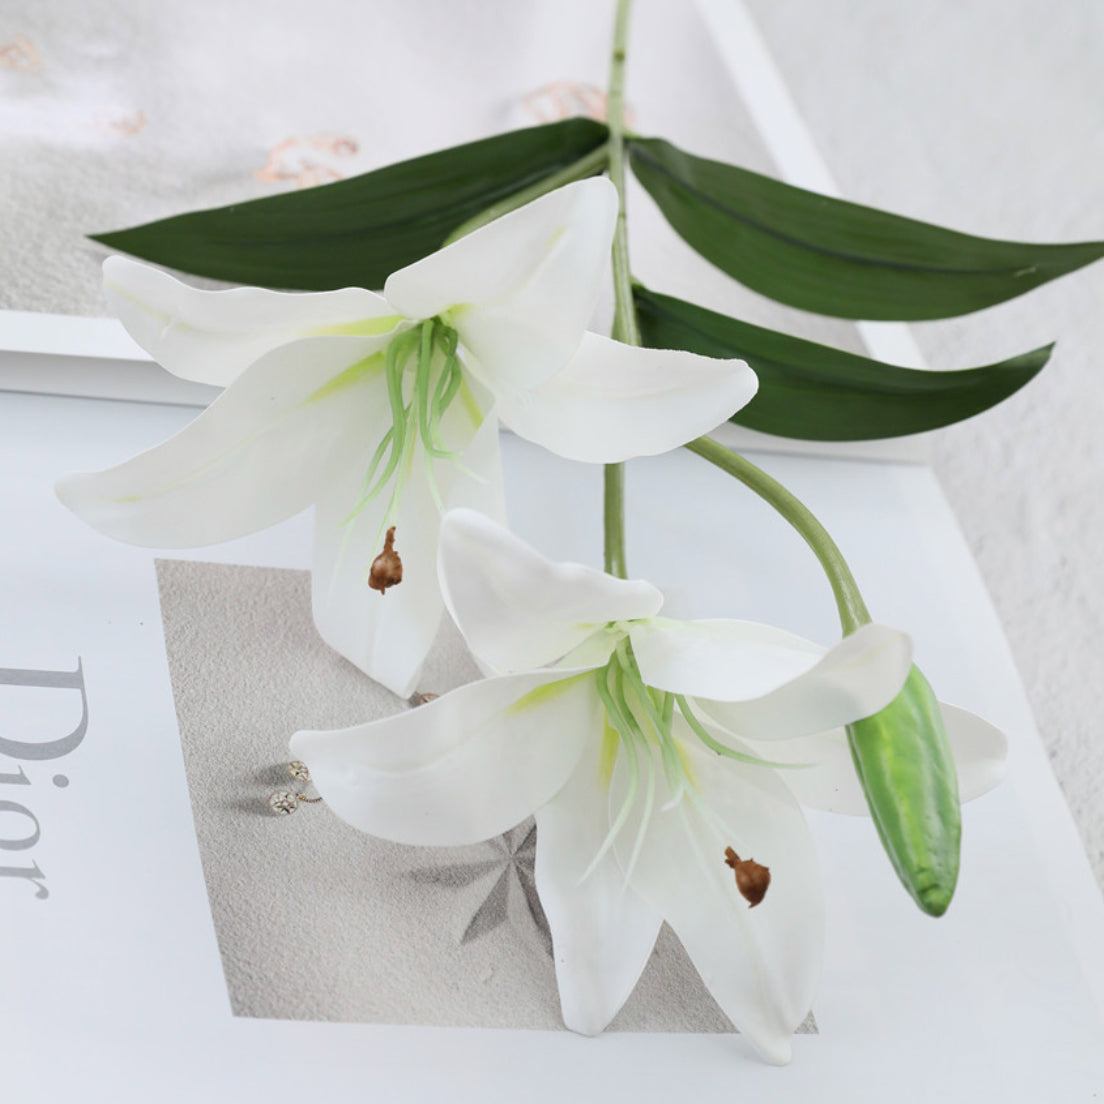 How to Grow and Care for Resurrection Lily